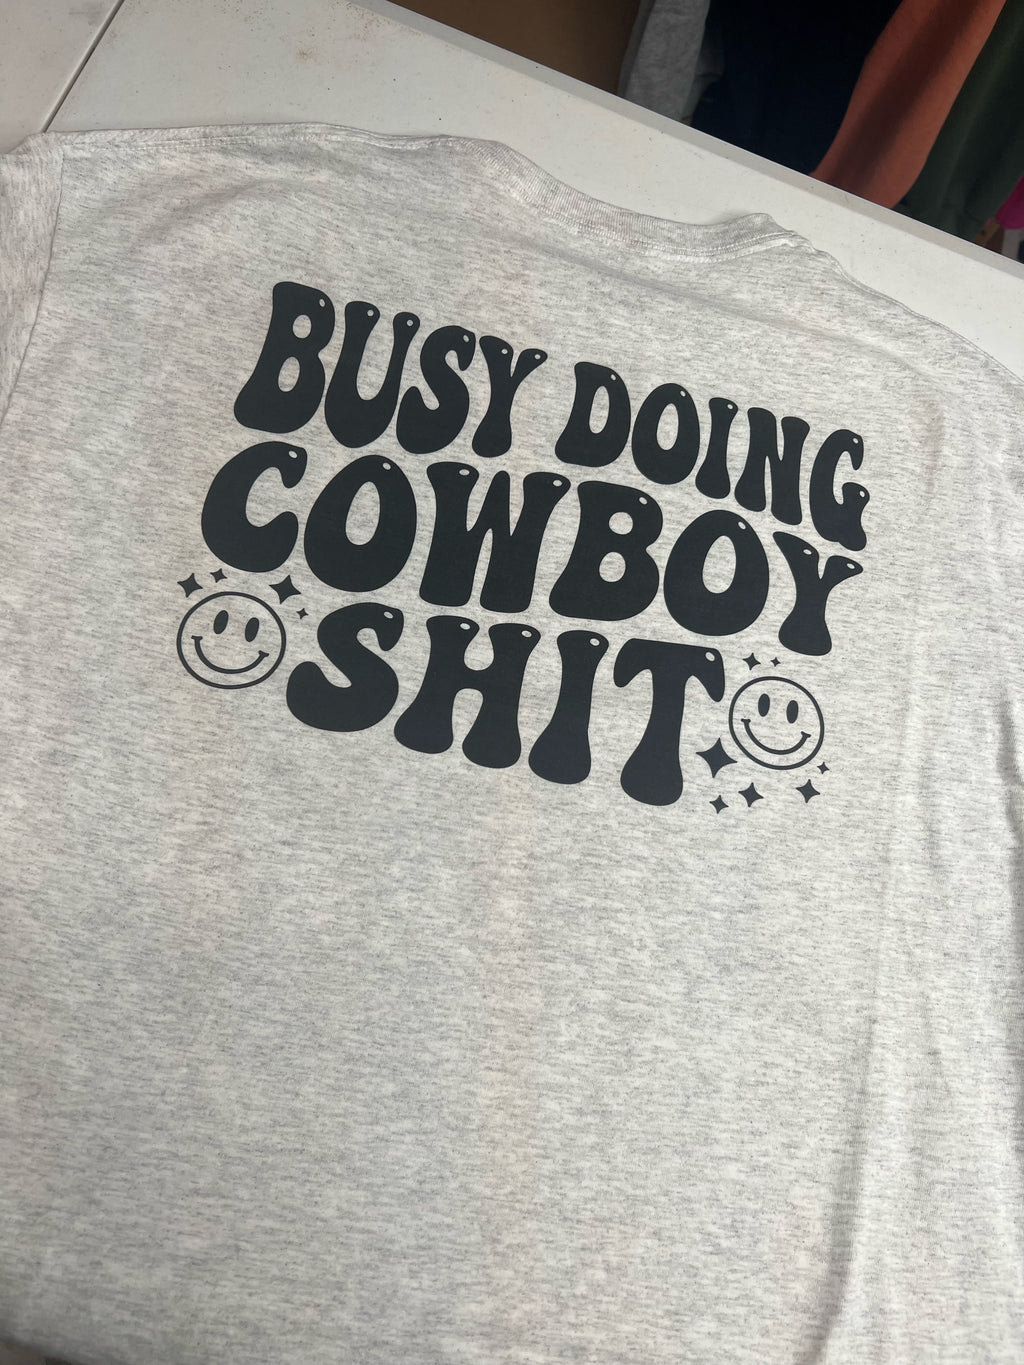 Busy doing cowboy shit design